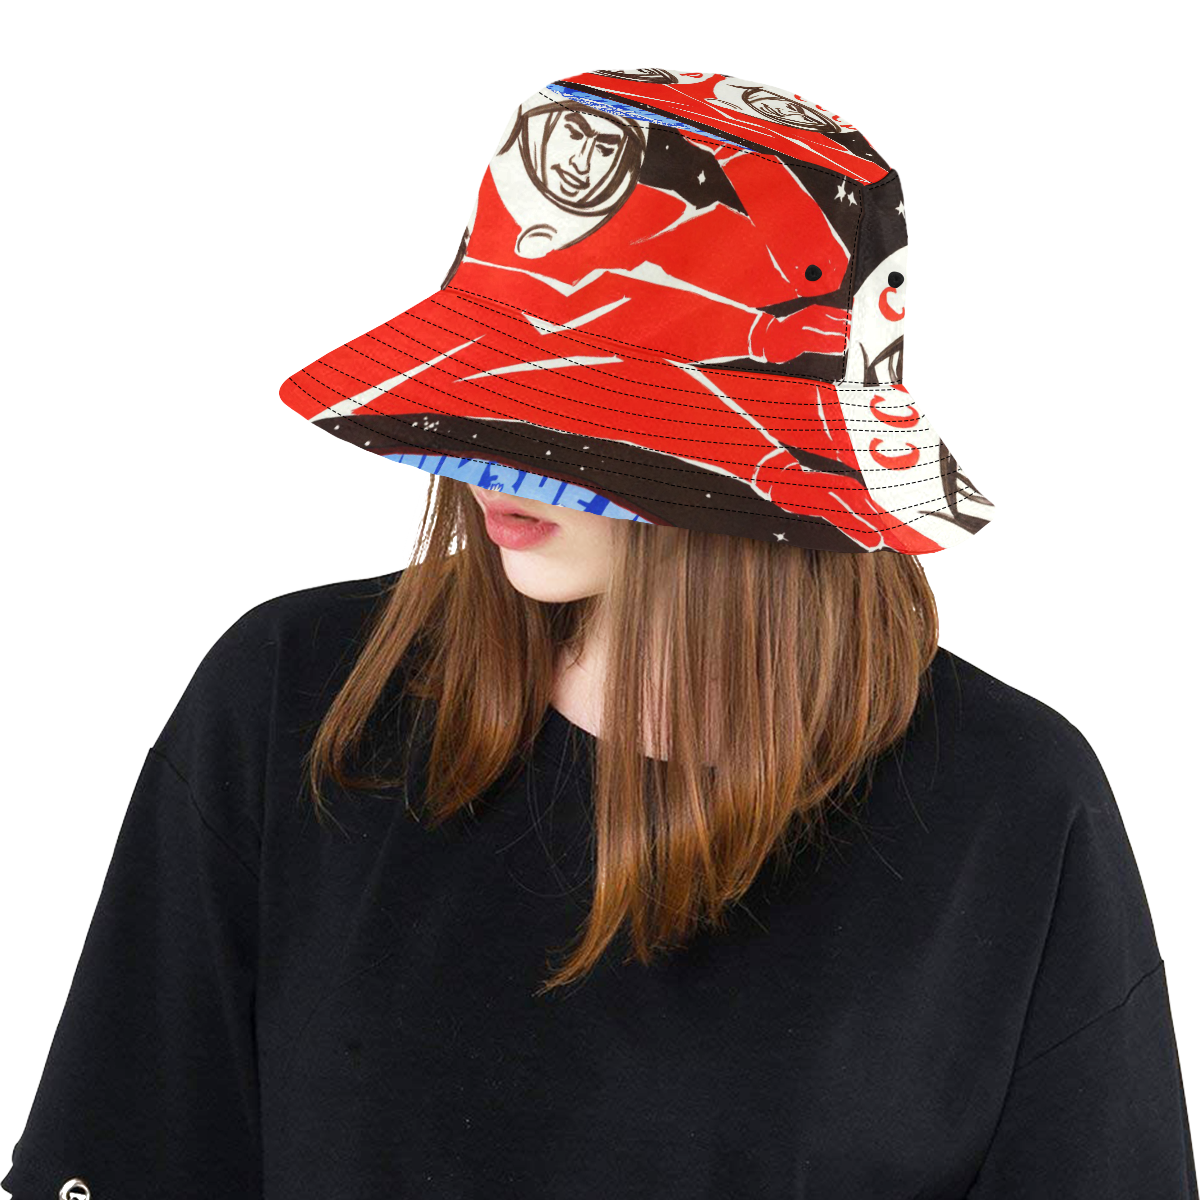 Glory to the Fatherland of Heroes! All Over Print Bucket Hat